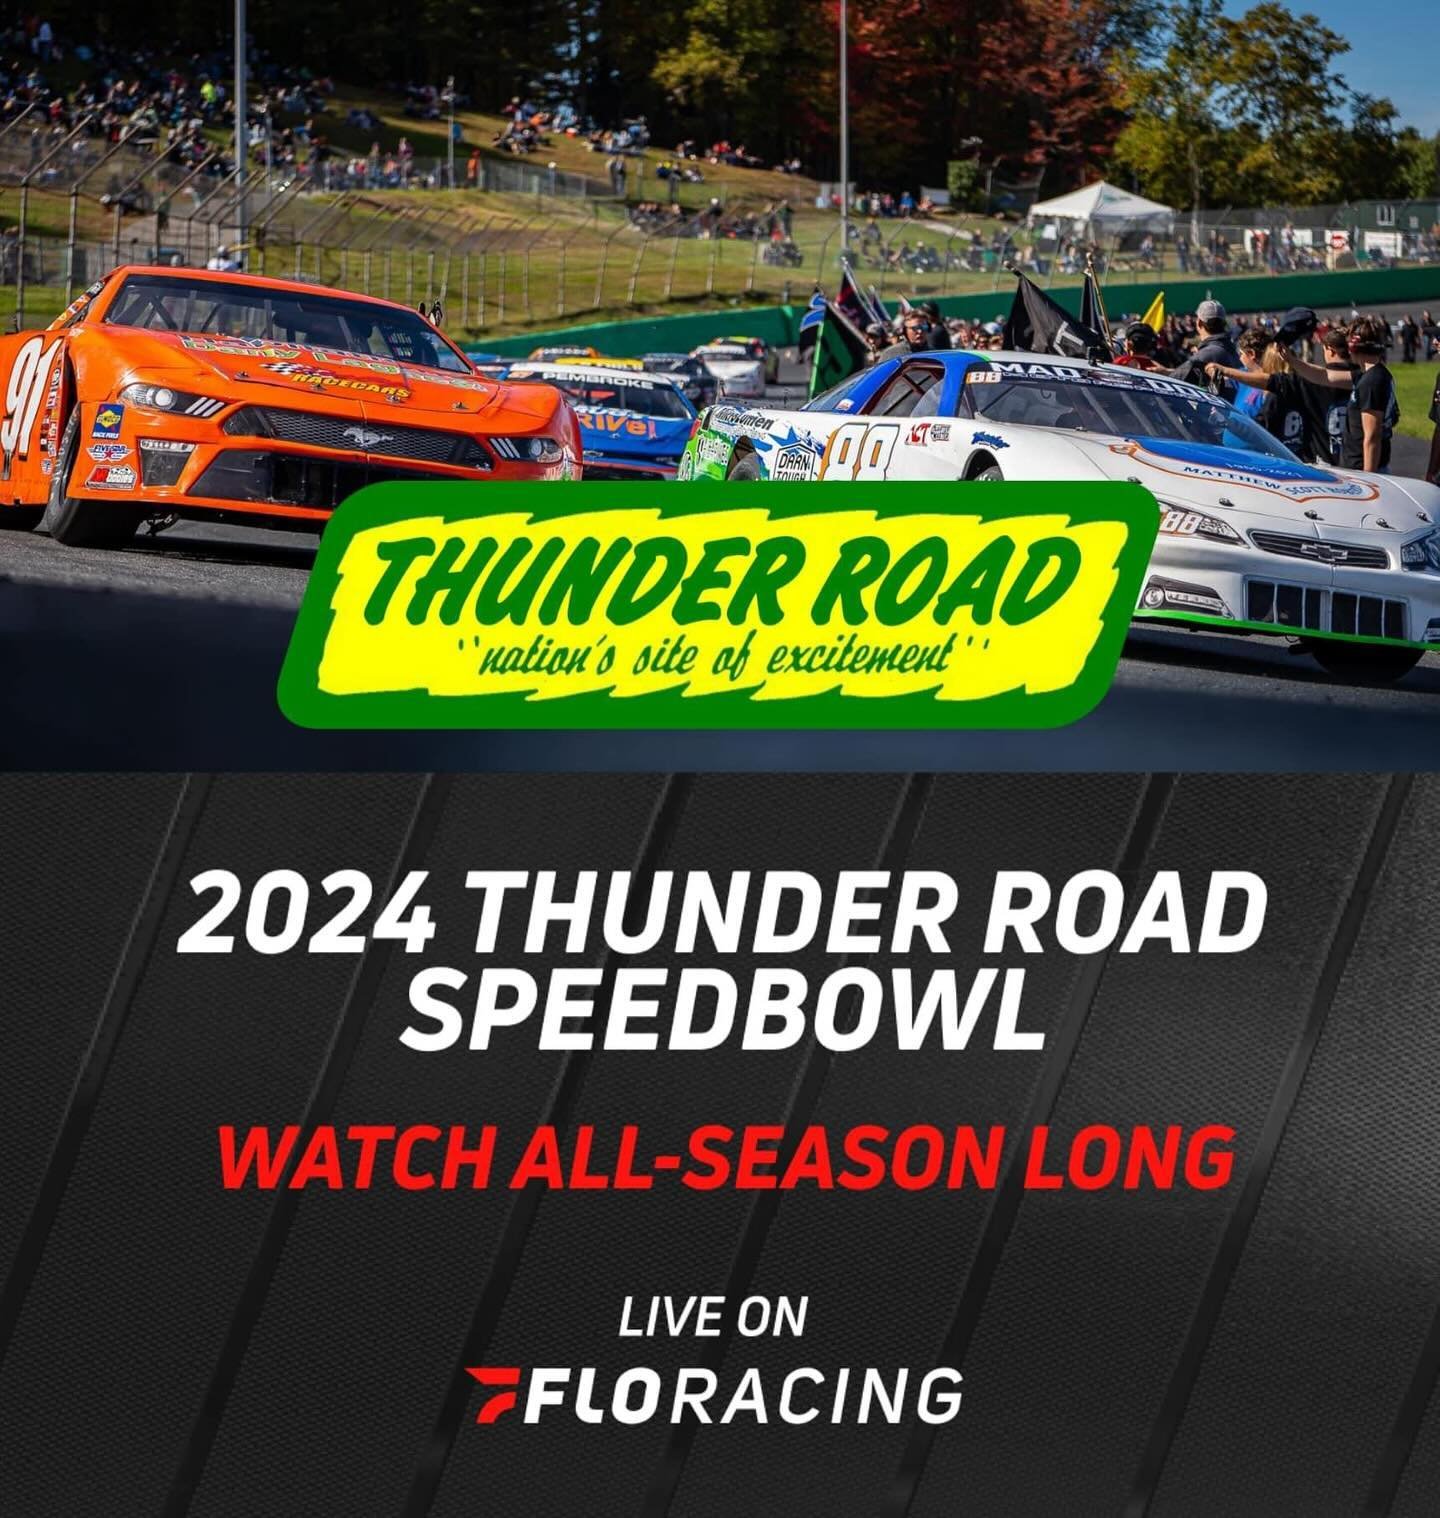 Every lap of every race at the &ldquo;Nation&rsquo;s Site of Excitement&rdquo; - Thunder Road International Speedbowl is LIVE on @floracing!